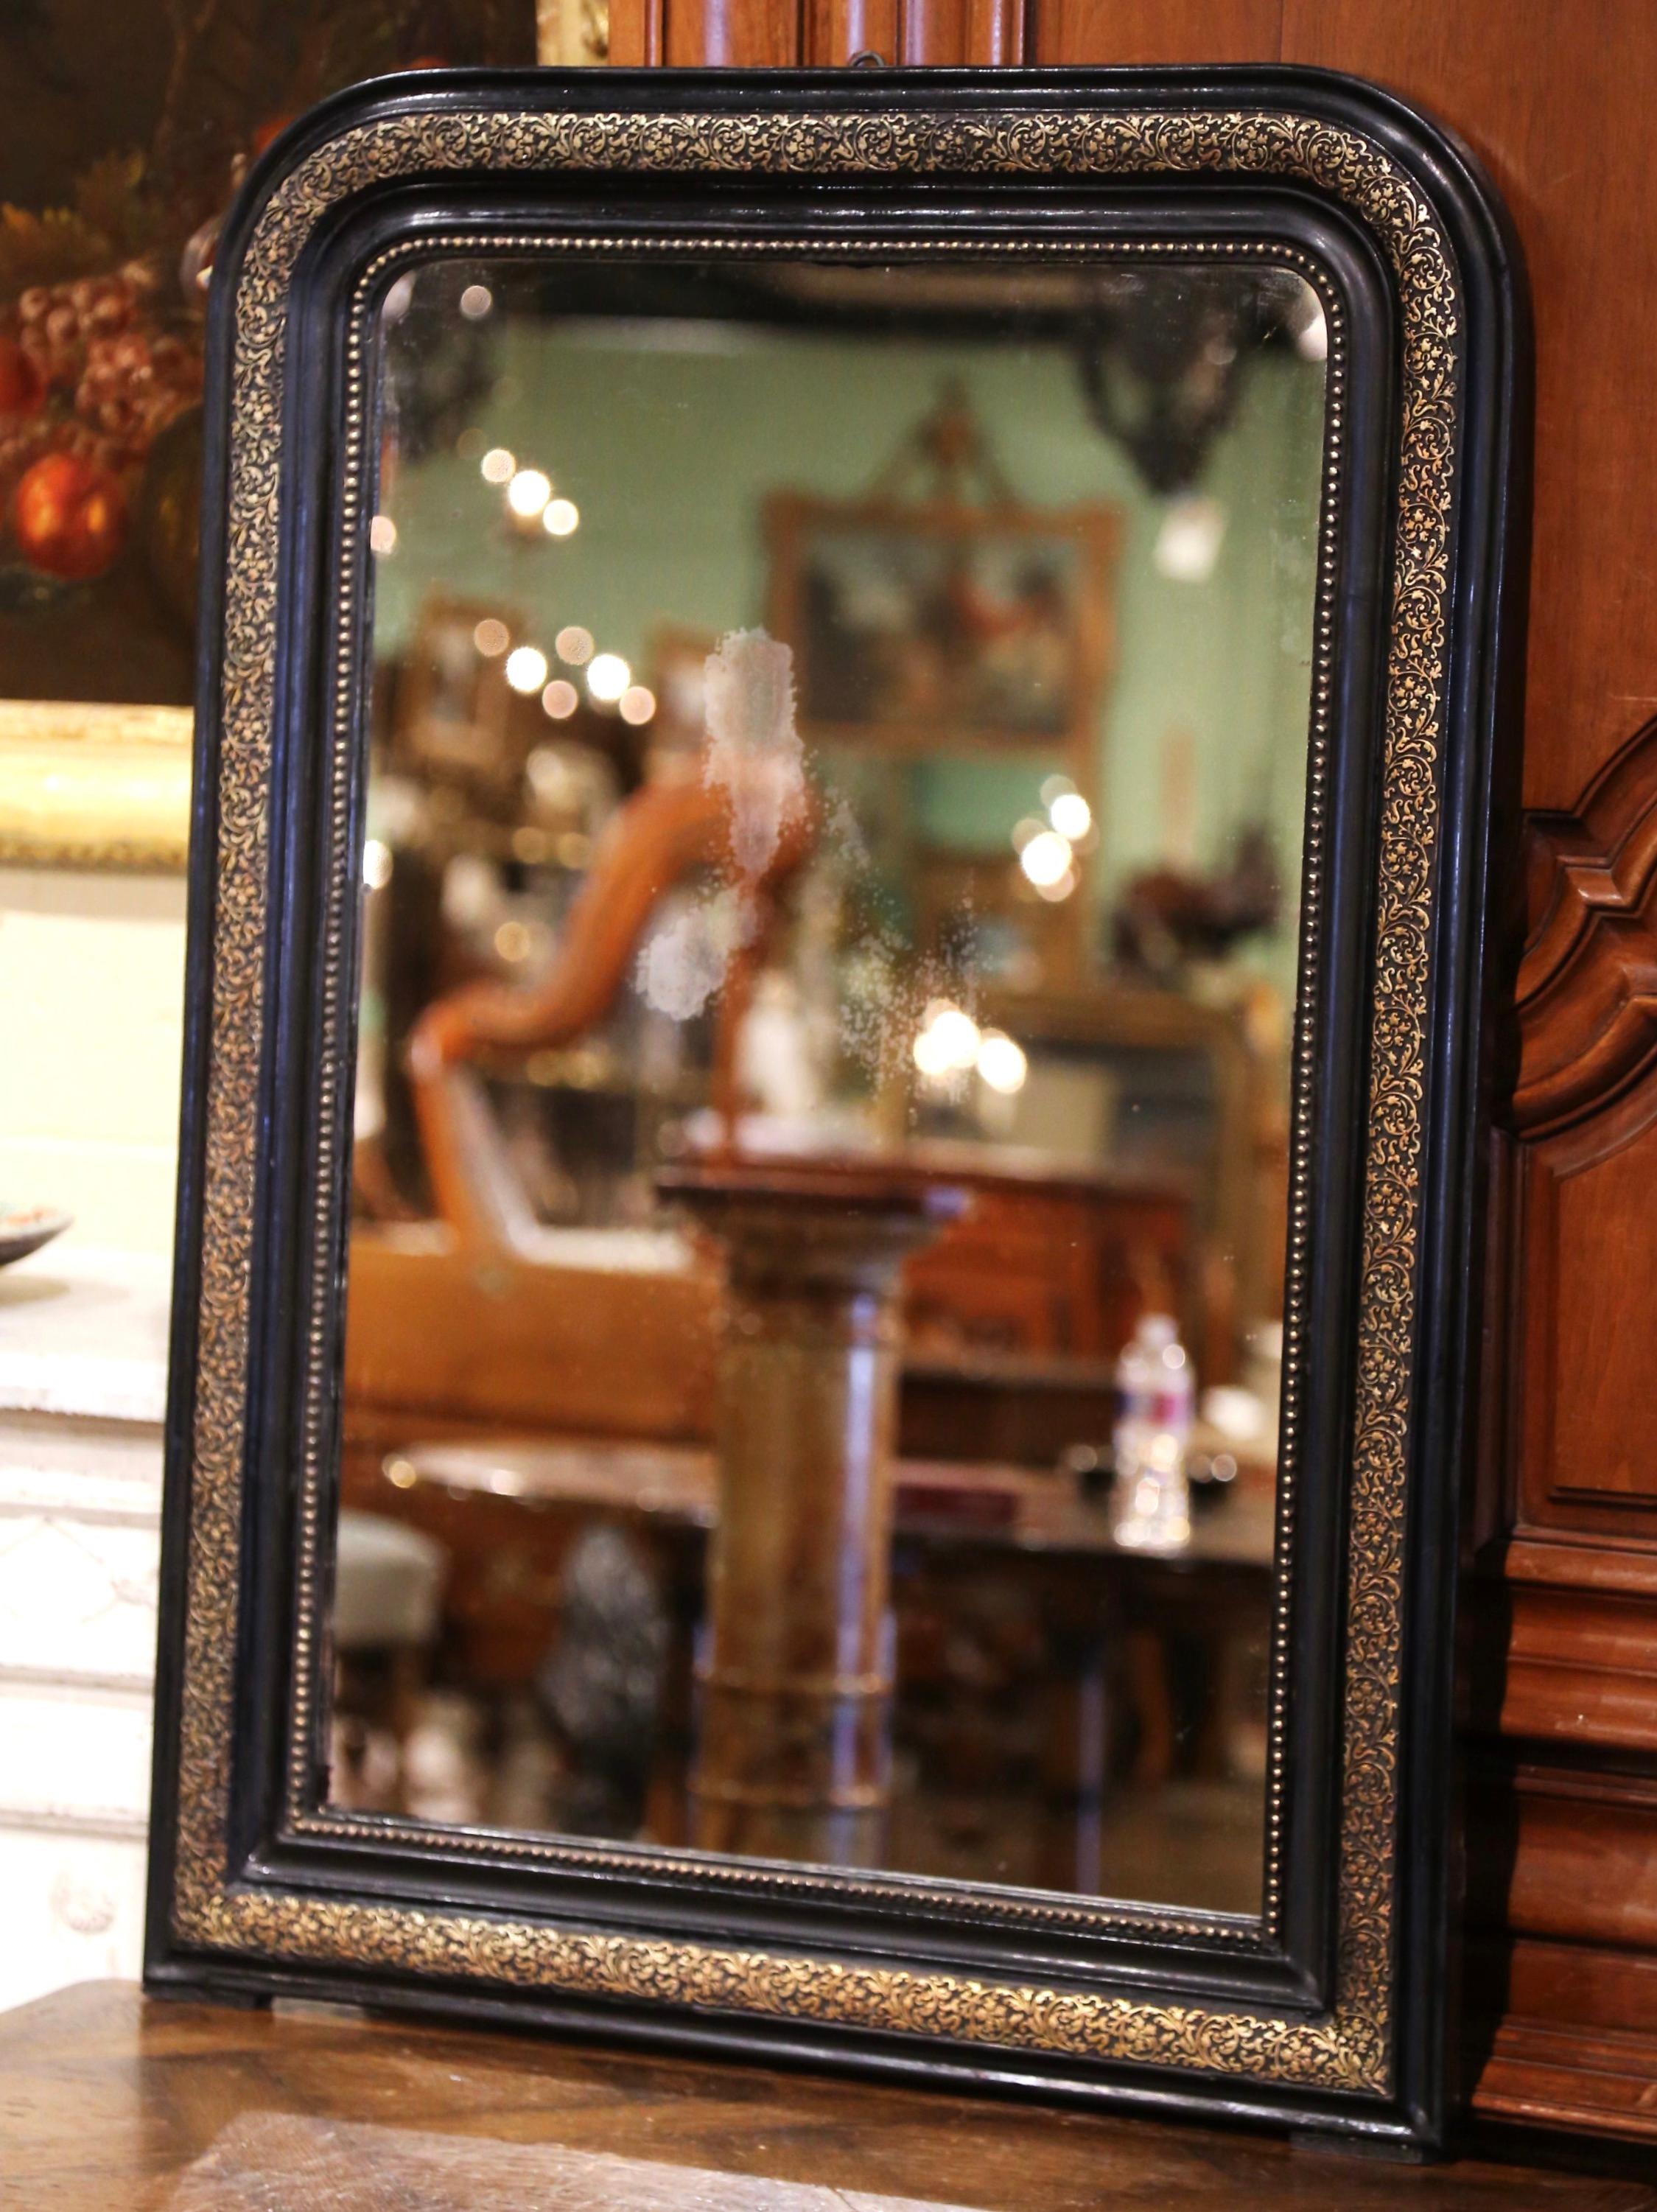 This elegant antique mirror with gold leaf and black lacquered was crafted in Southern France, circa 1860. The frame is decorated with hand carved repousse foliage motifs further embellished with bead decor around the frame. The wall hanging piece